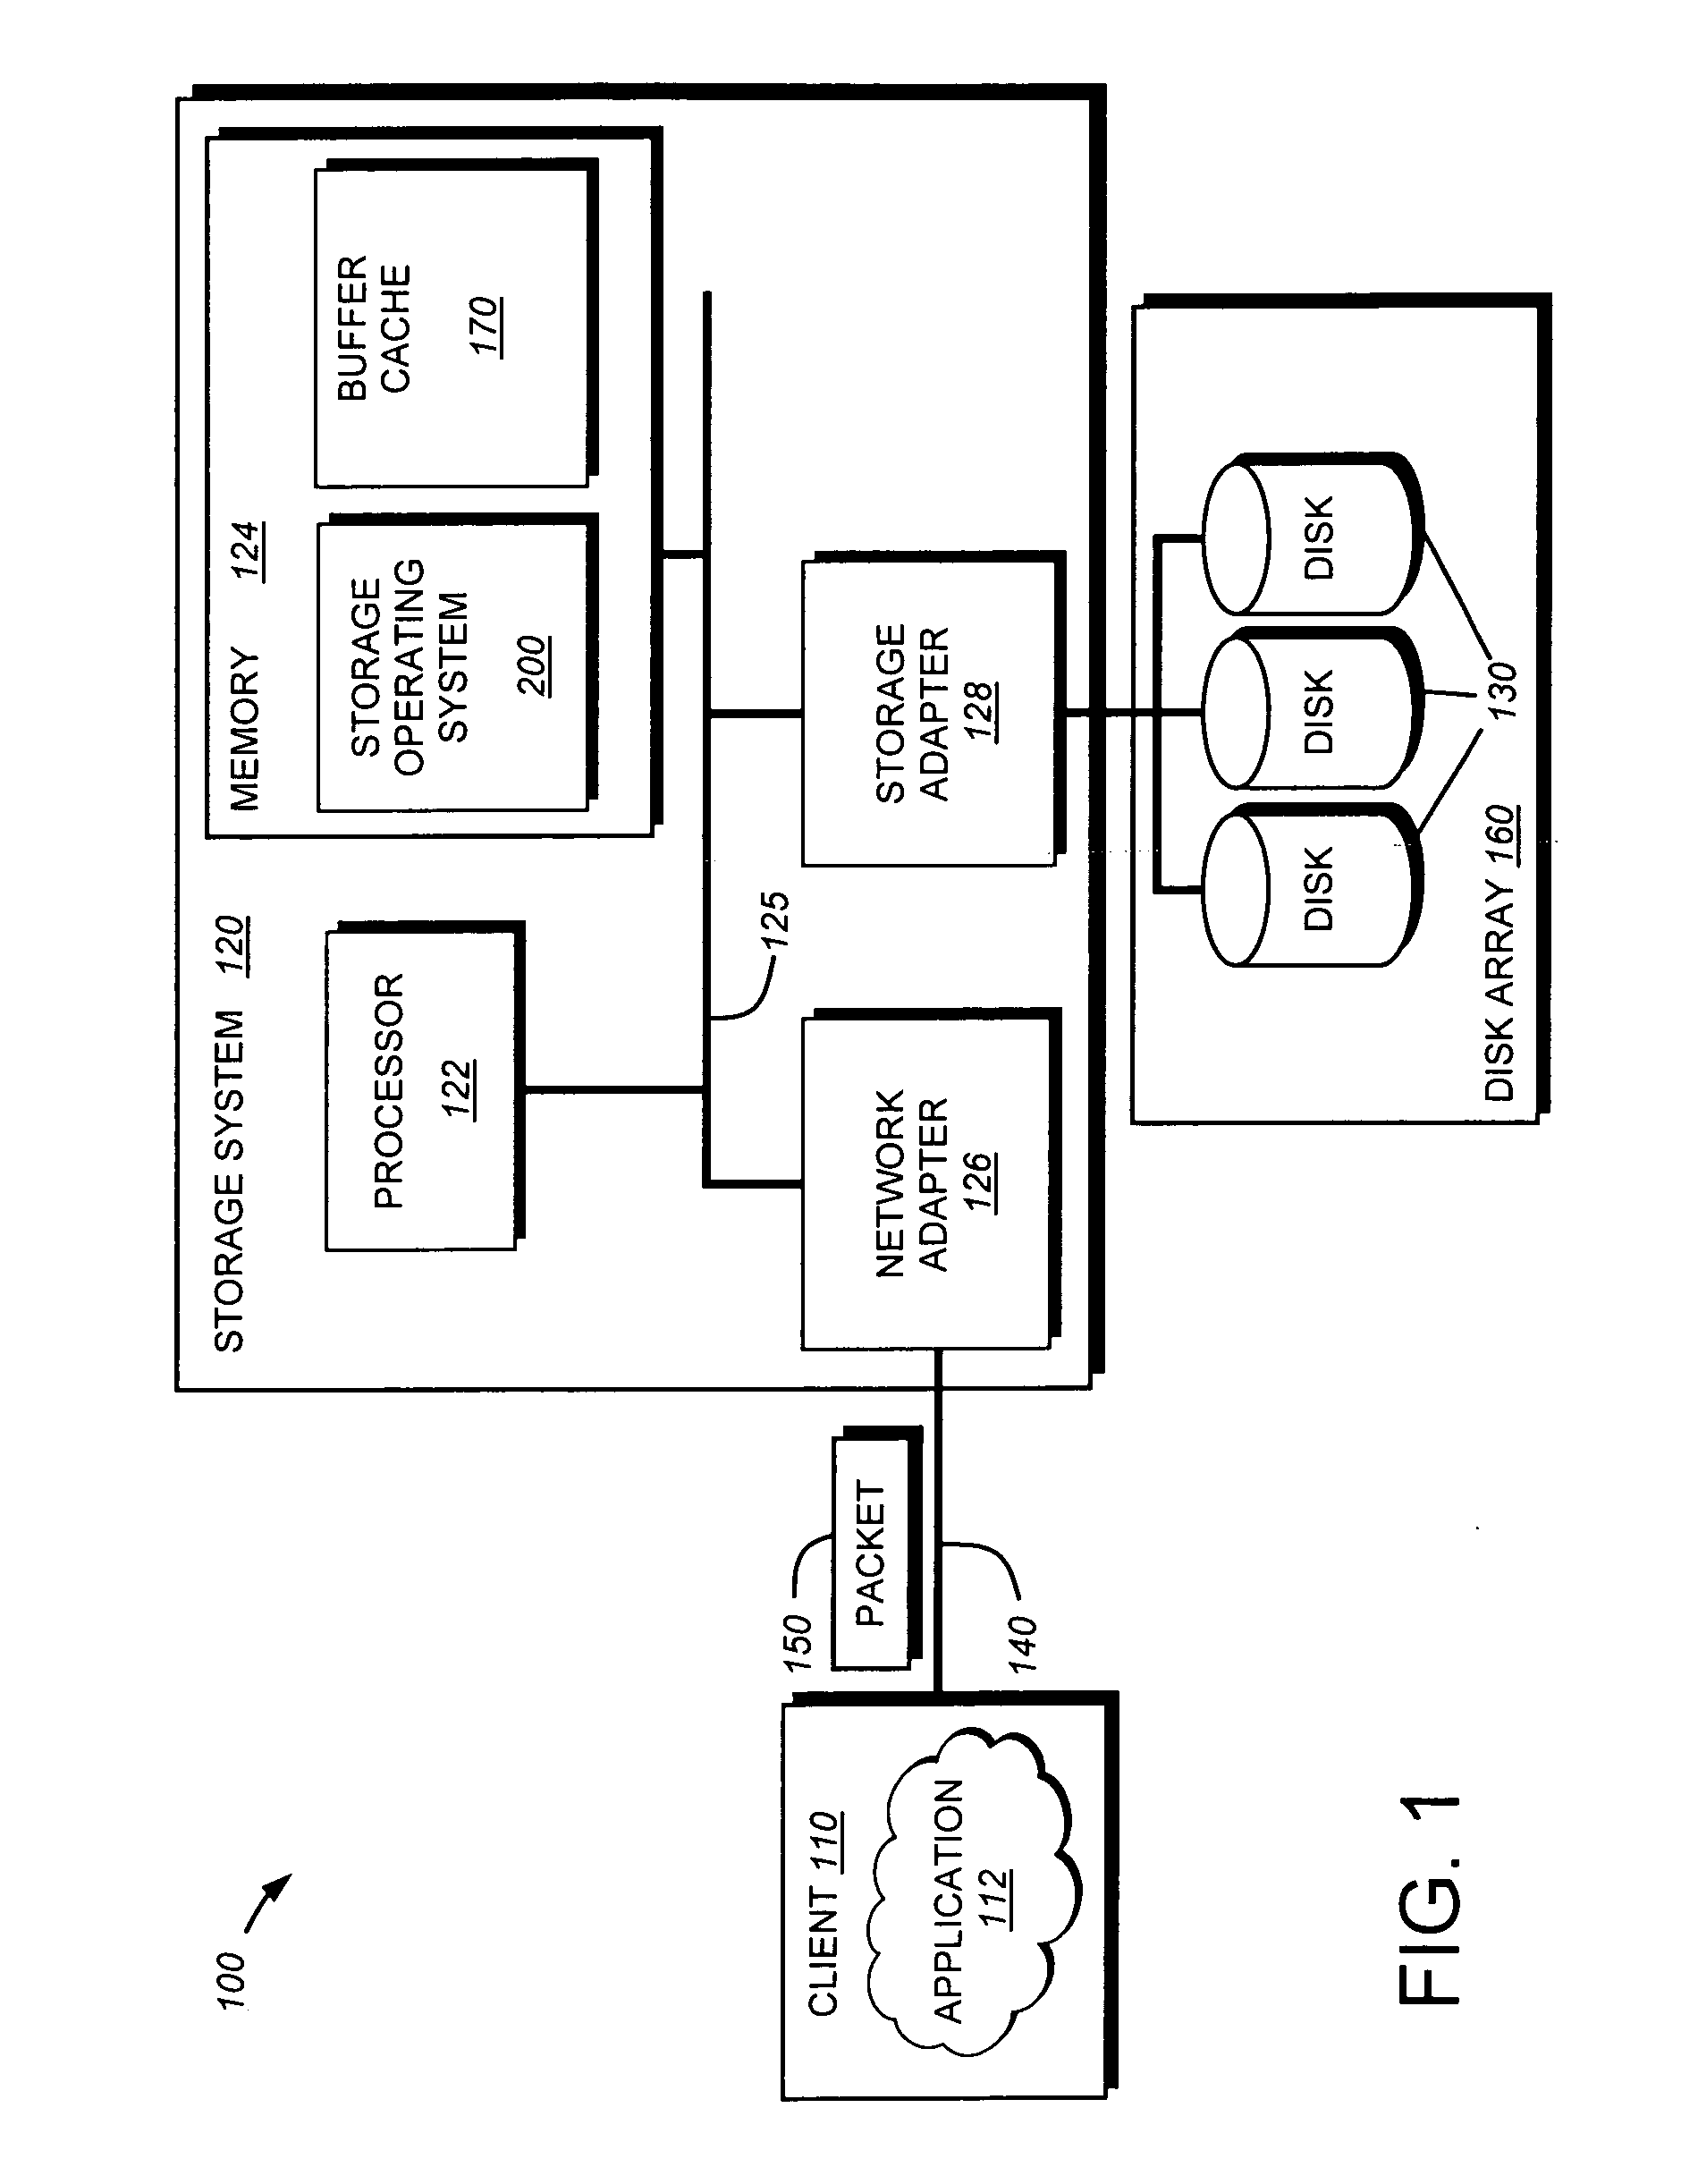 System and method for maintaining mappings from data containers to their parent directories